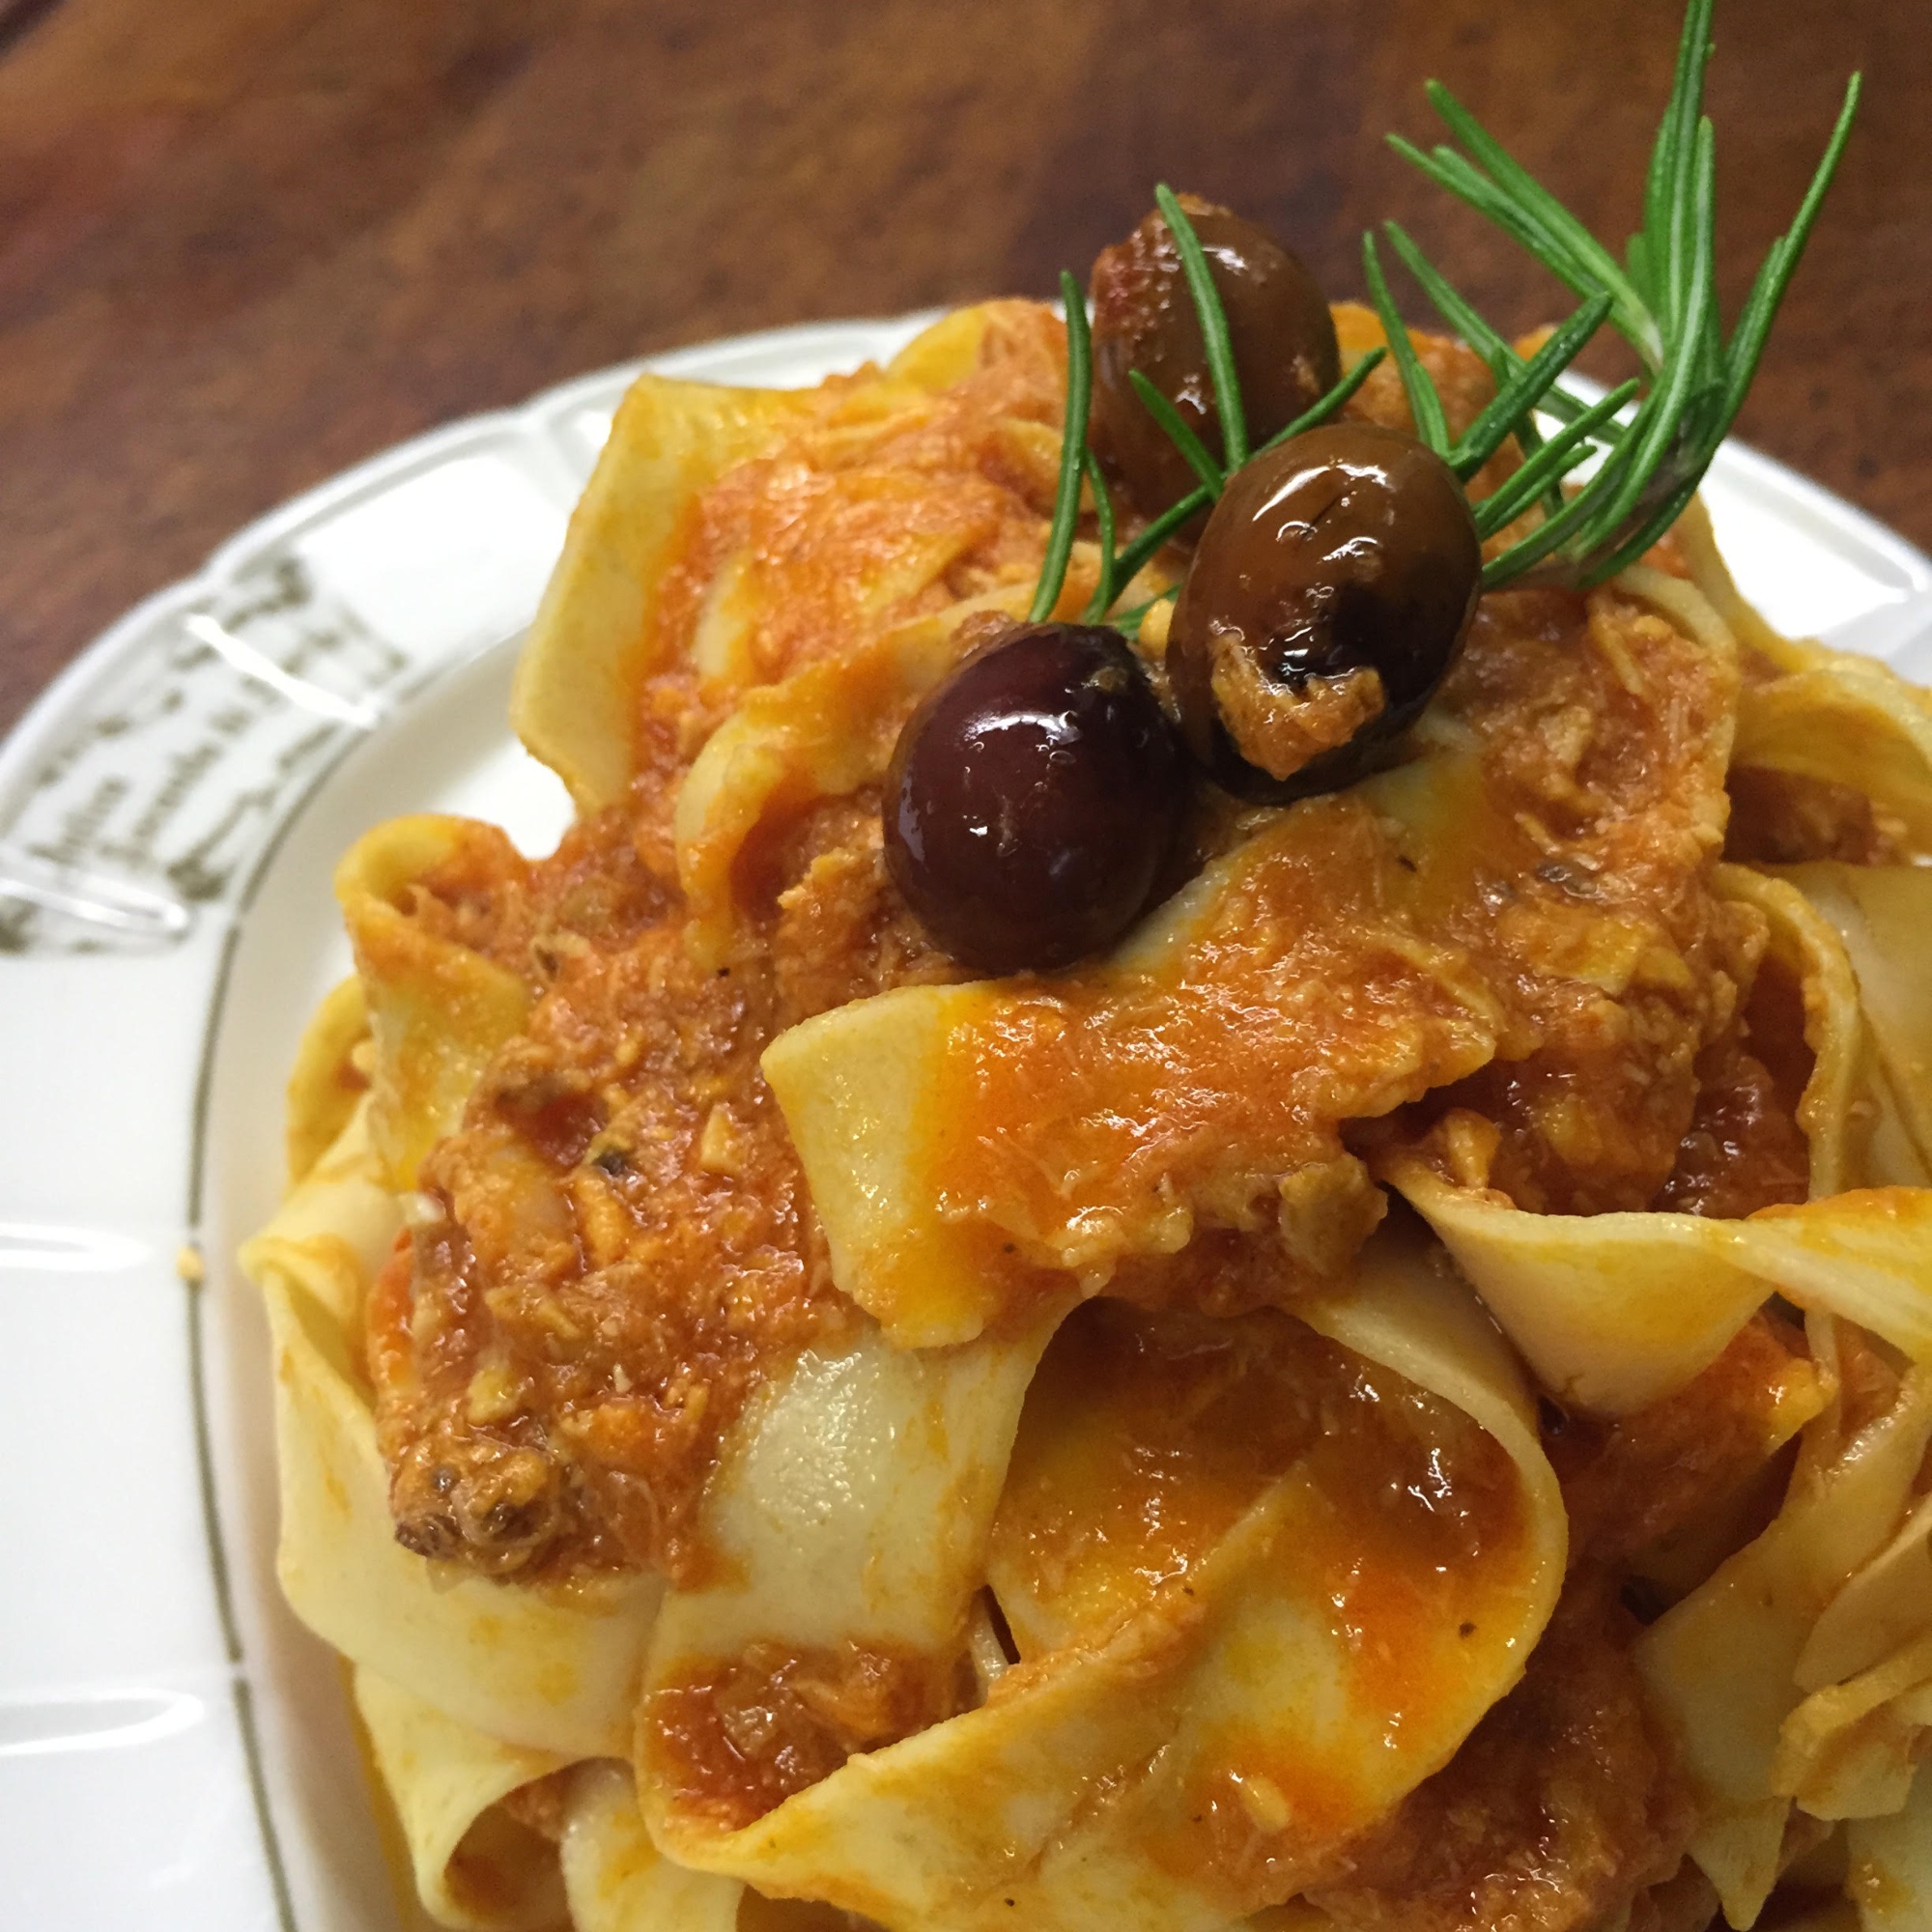 Pappardelle pasta on the hare